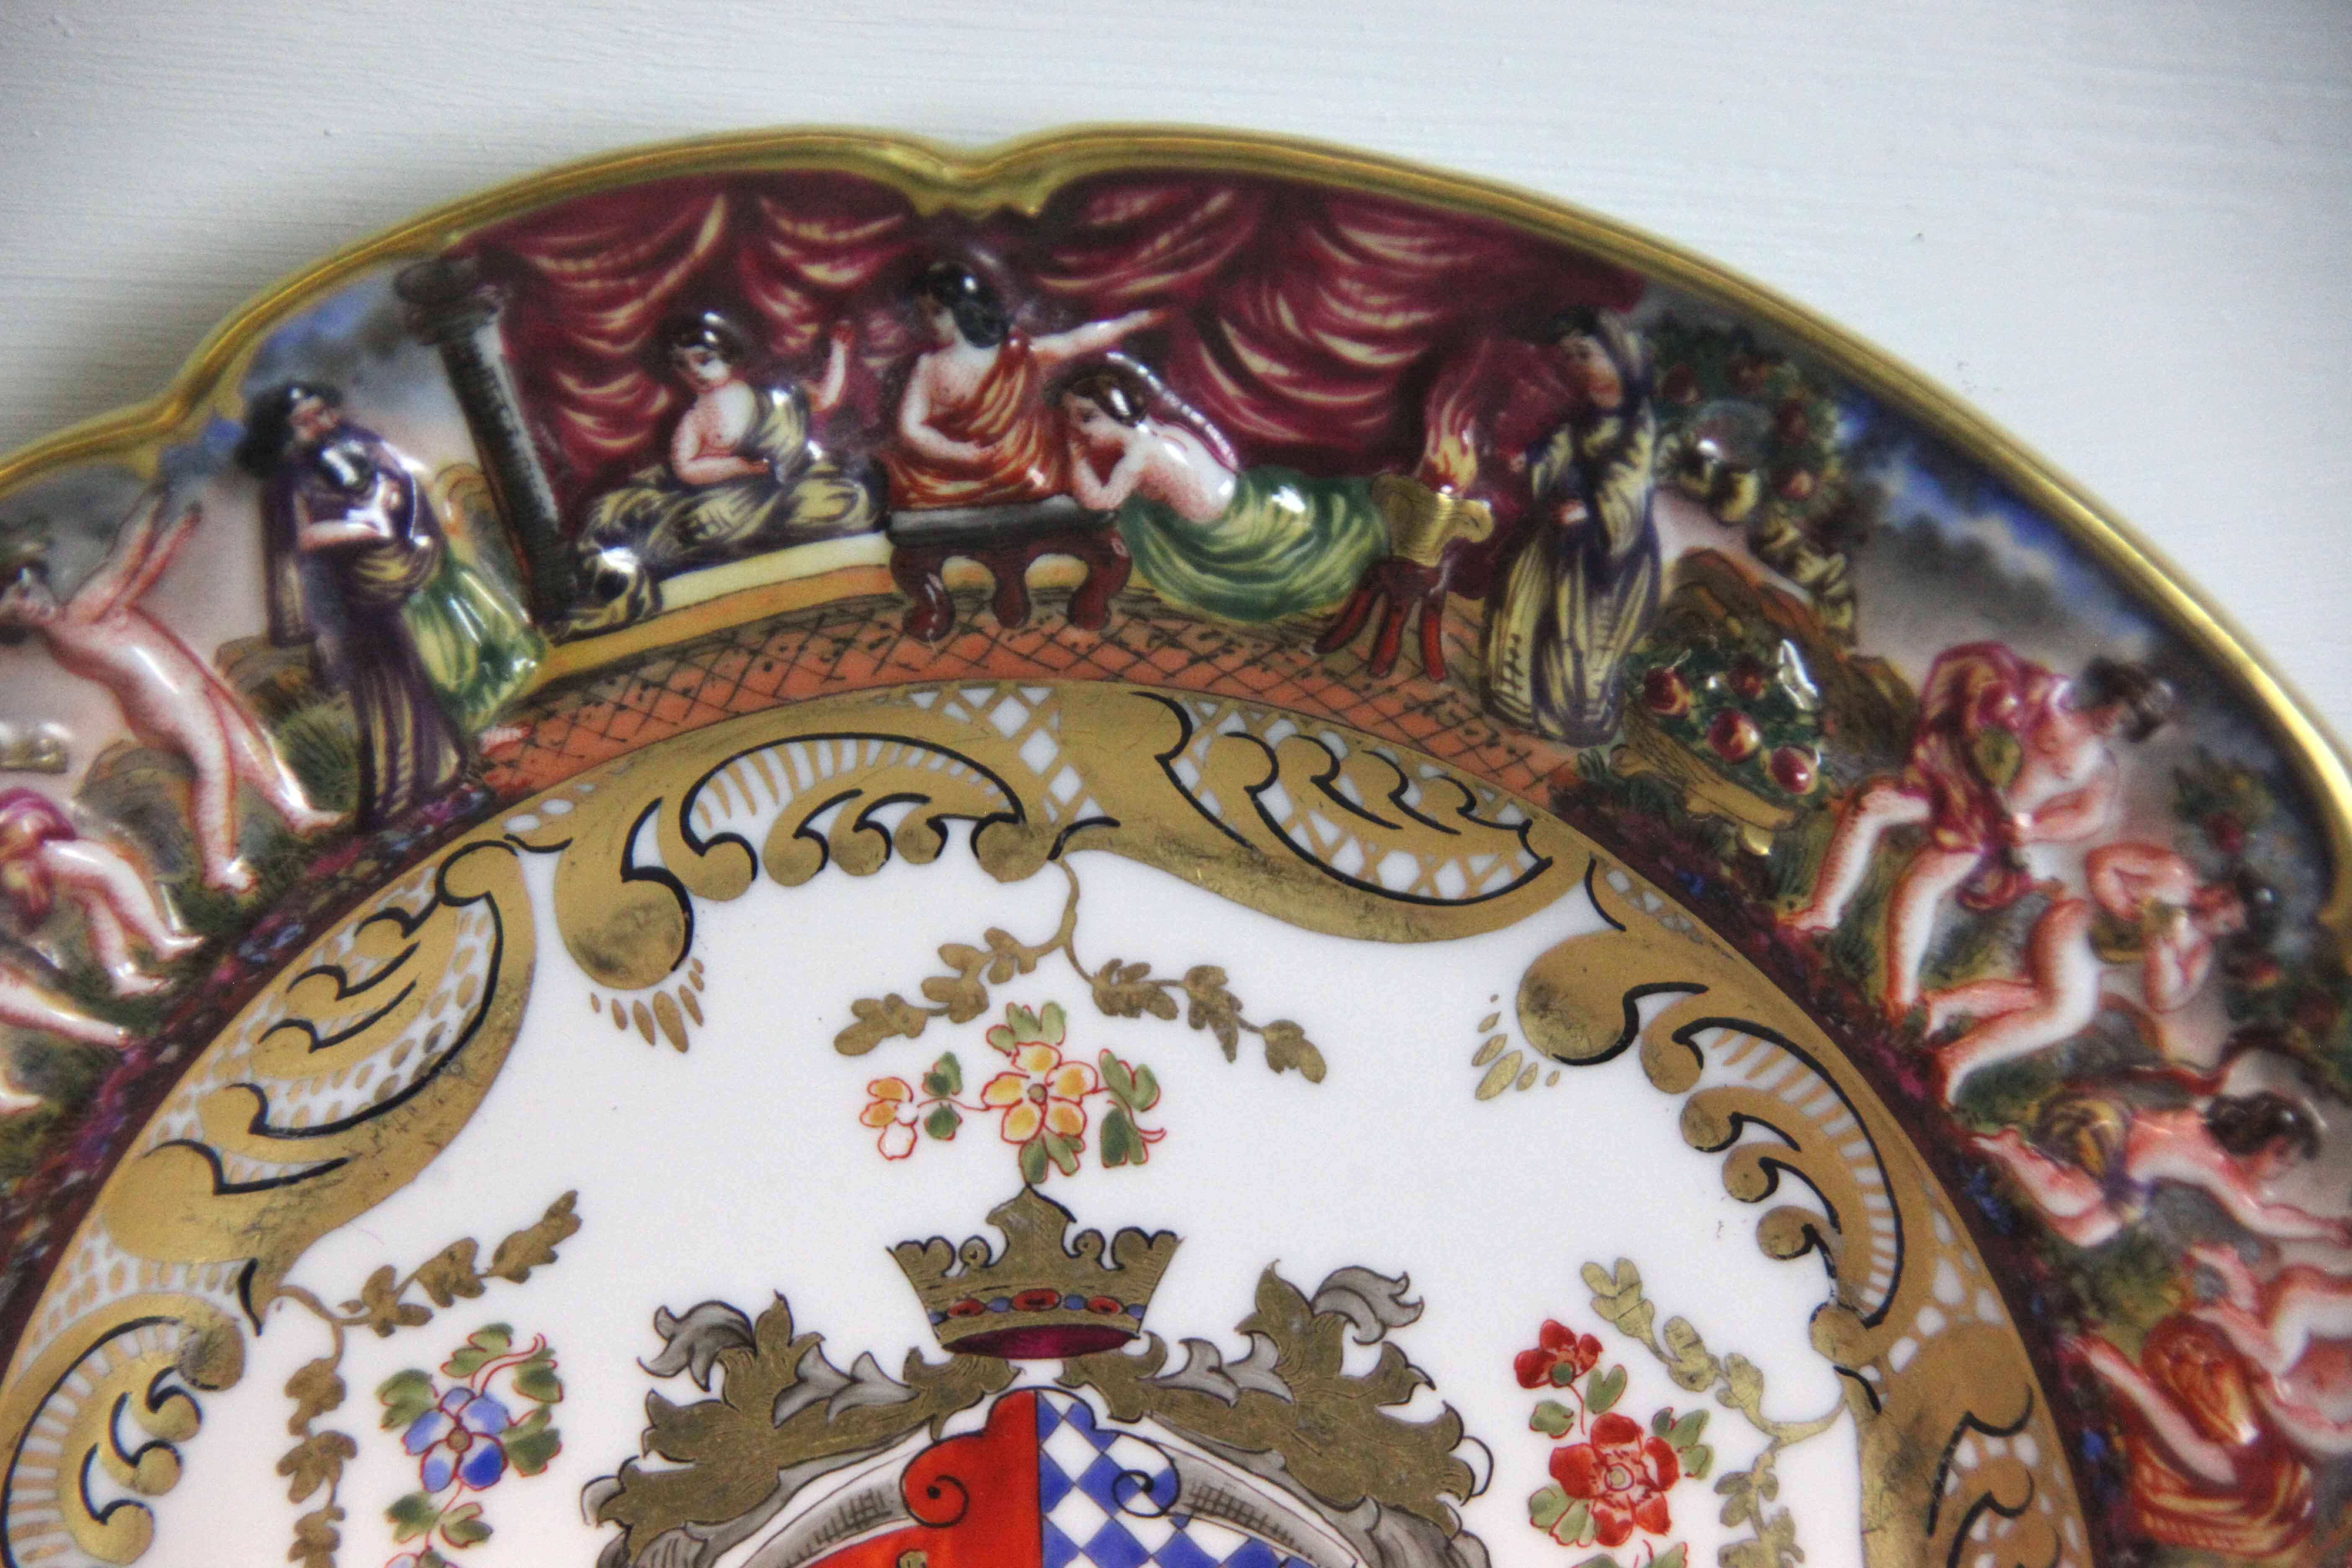 19th century Capodimonte plate, with shaped rim, the border with classical scenes, center featuring coat of arms.